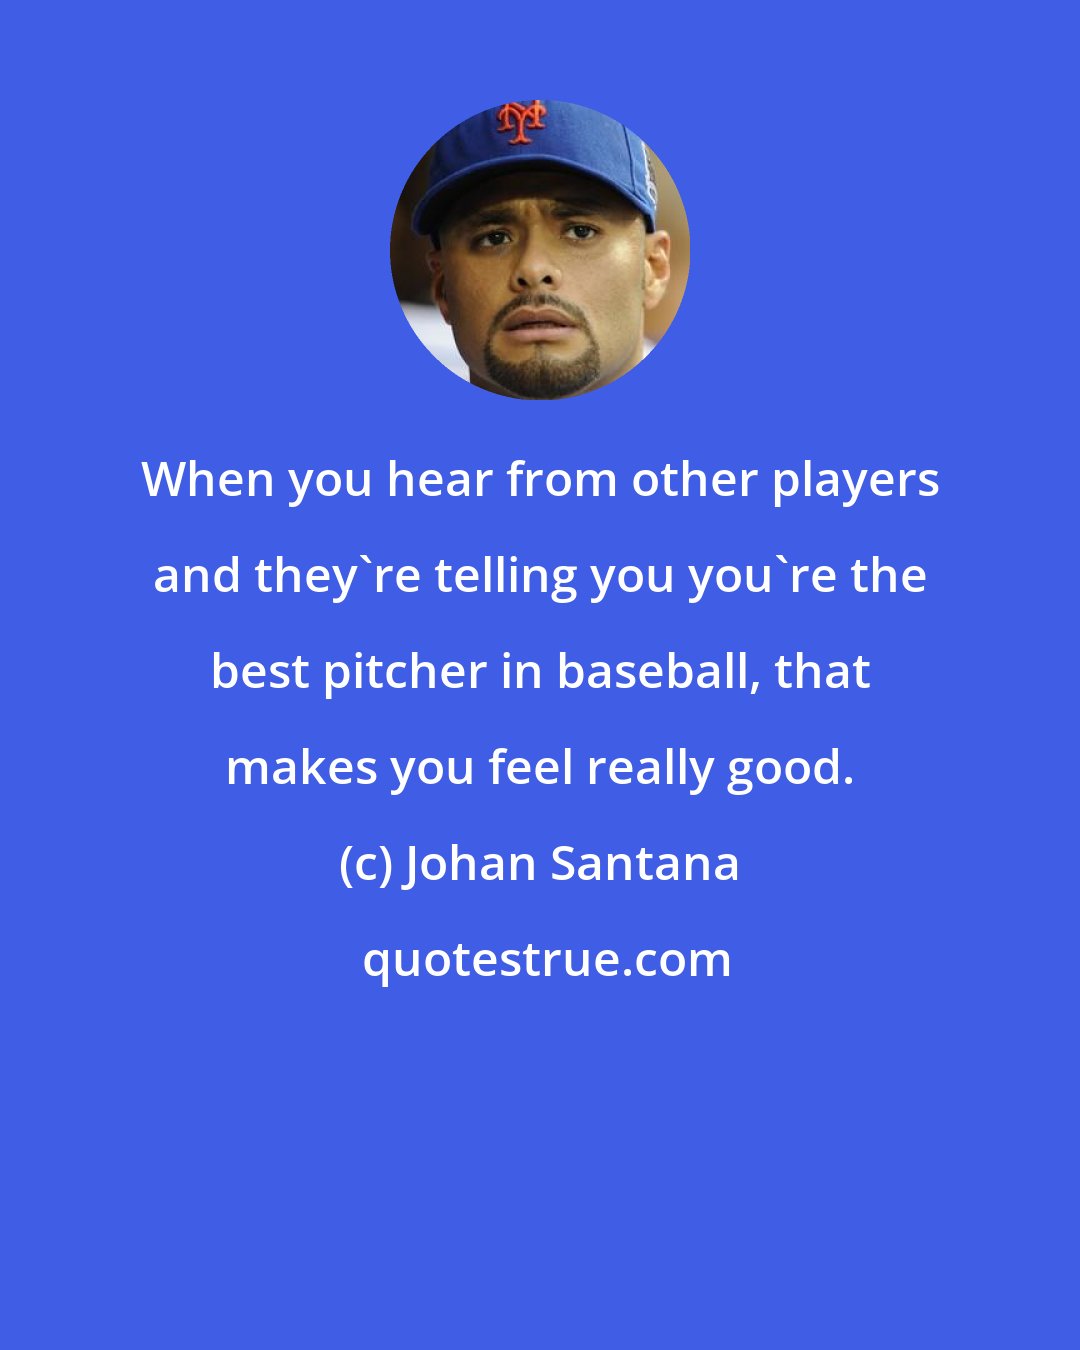 Johan Santana: When you hear from other players and they're telling you you're the best pitcher in baseball, that makes you feel really good.